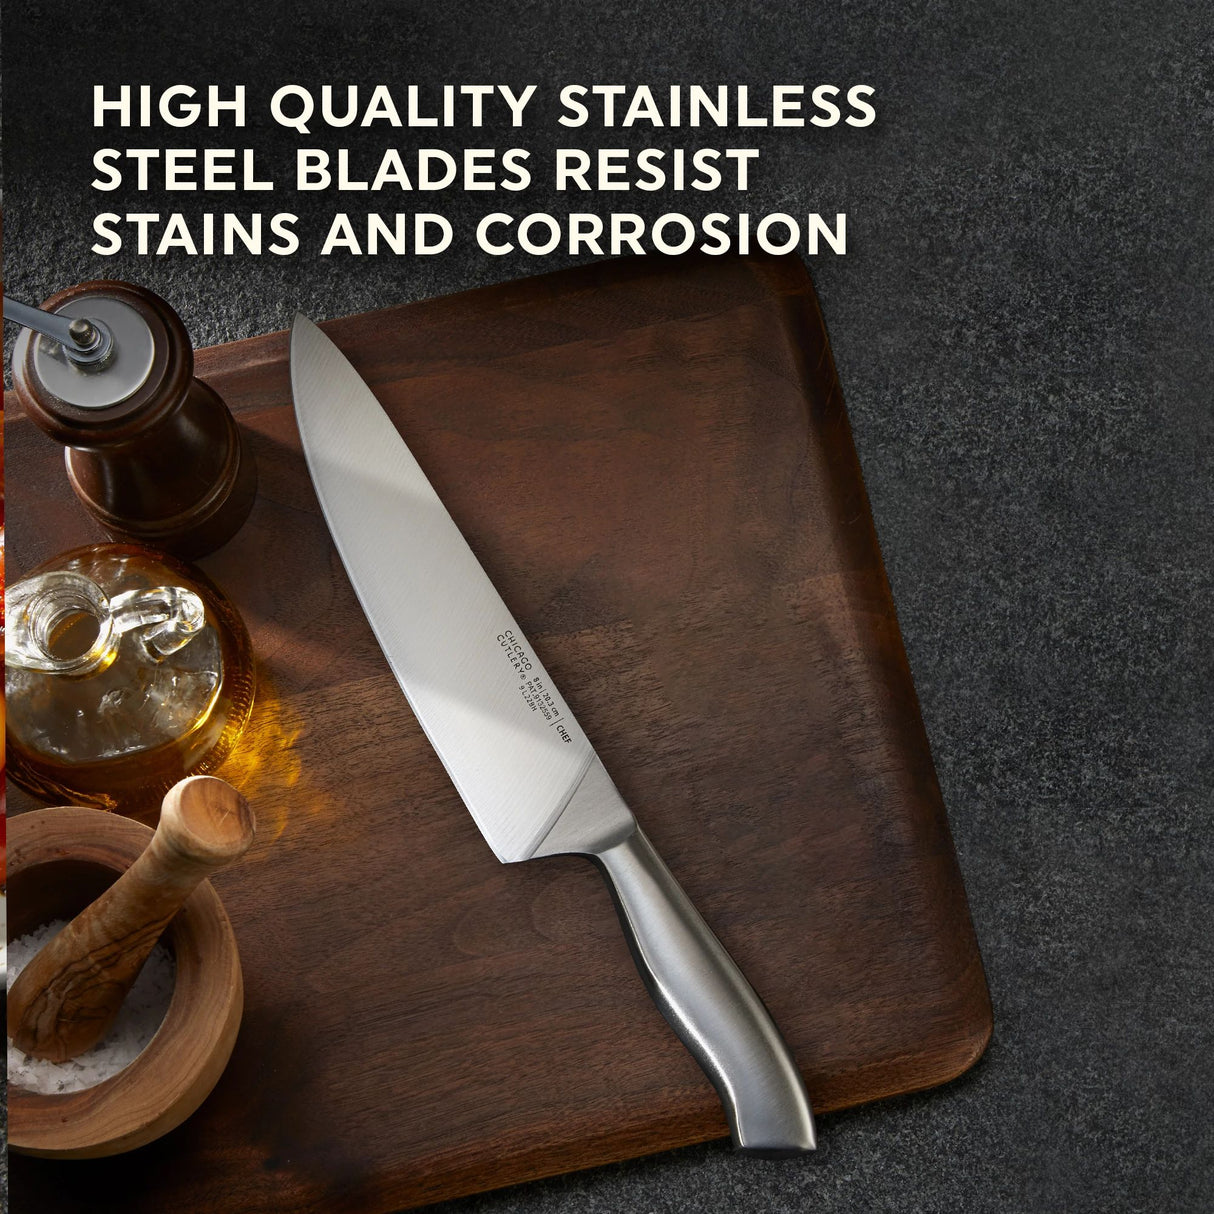  Insignia Steel Chef Knife with text high quality stainless steel blades resist &amp; corrosion